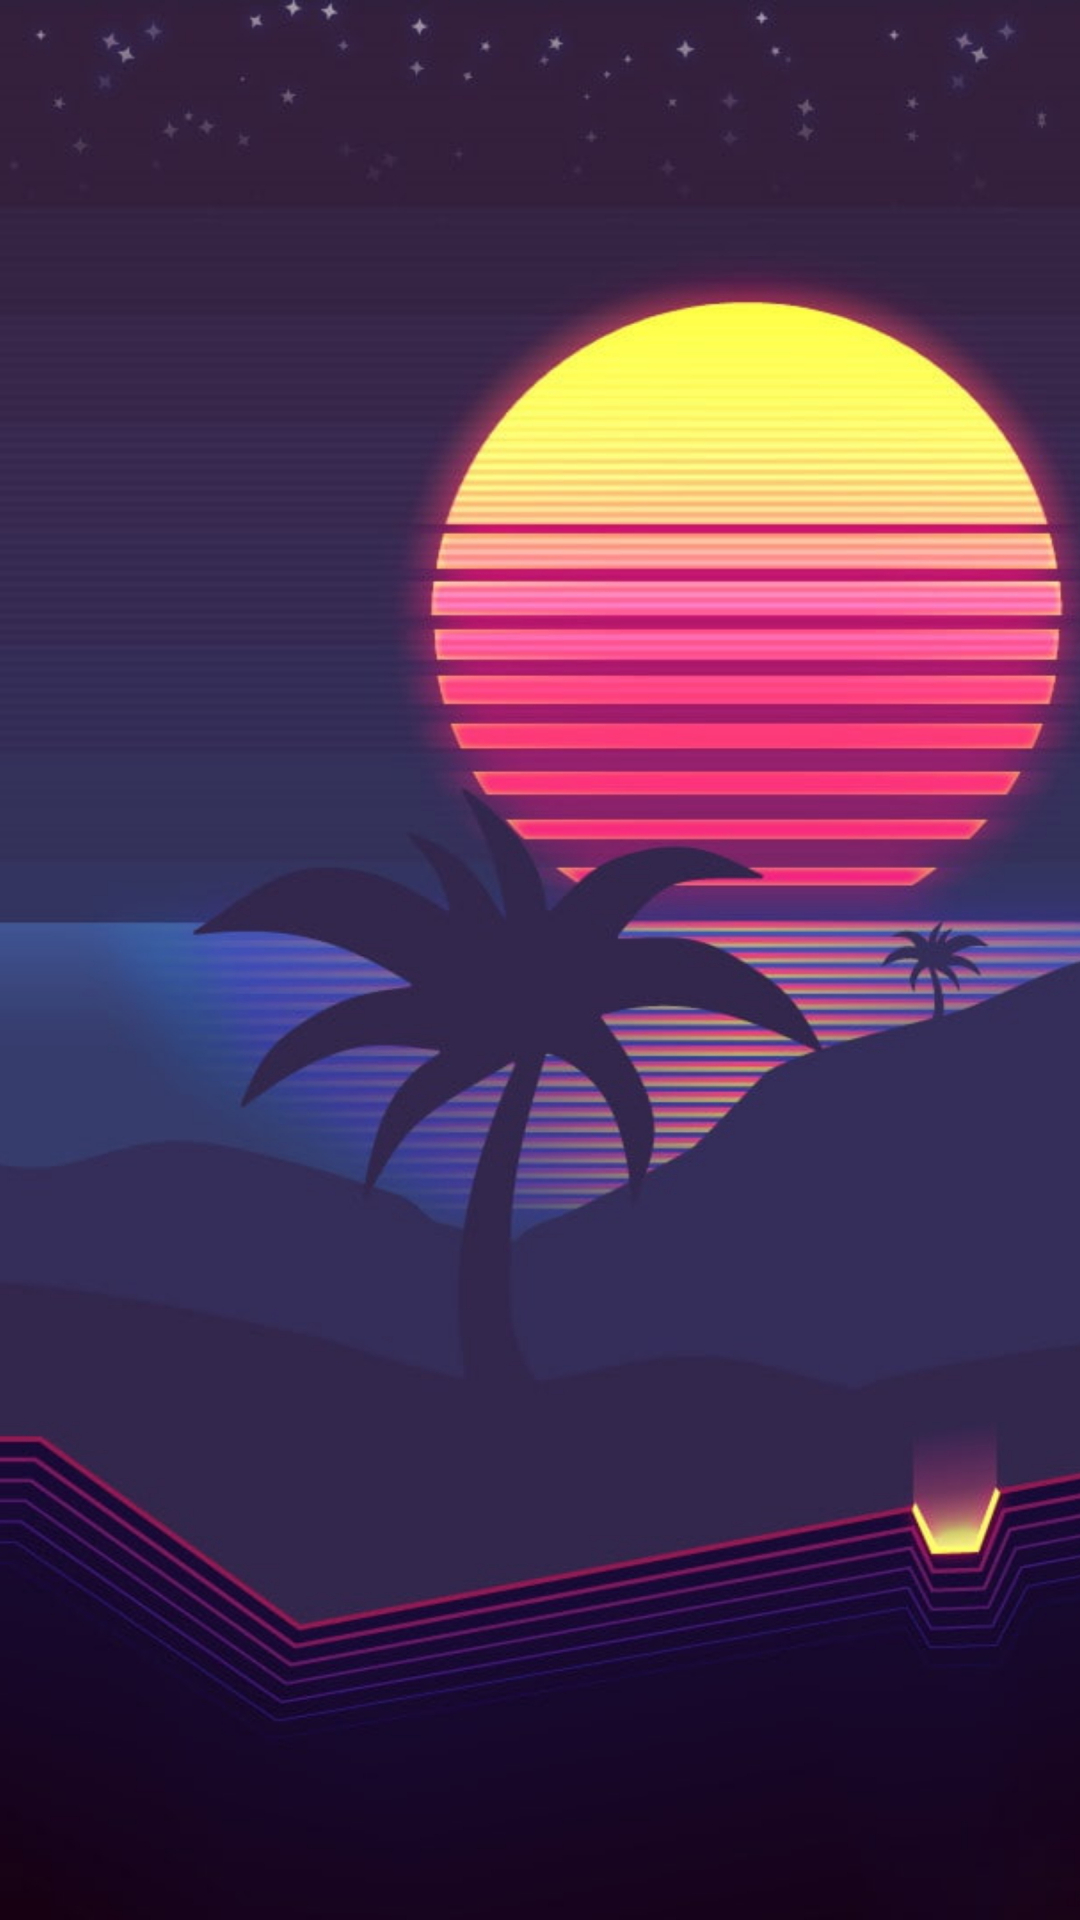 1080x19 Synthwave 4k Iphone 7 6s 6 Plus And Pixel Xl One Plus 3 3t 5 Wallpaper Hd Artist 4k Wallpapers Images Photos And Background